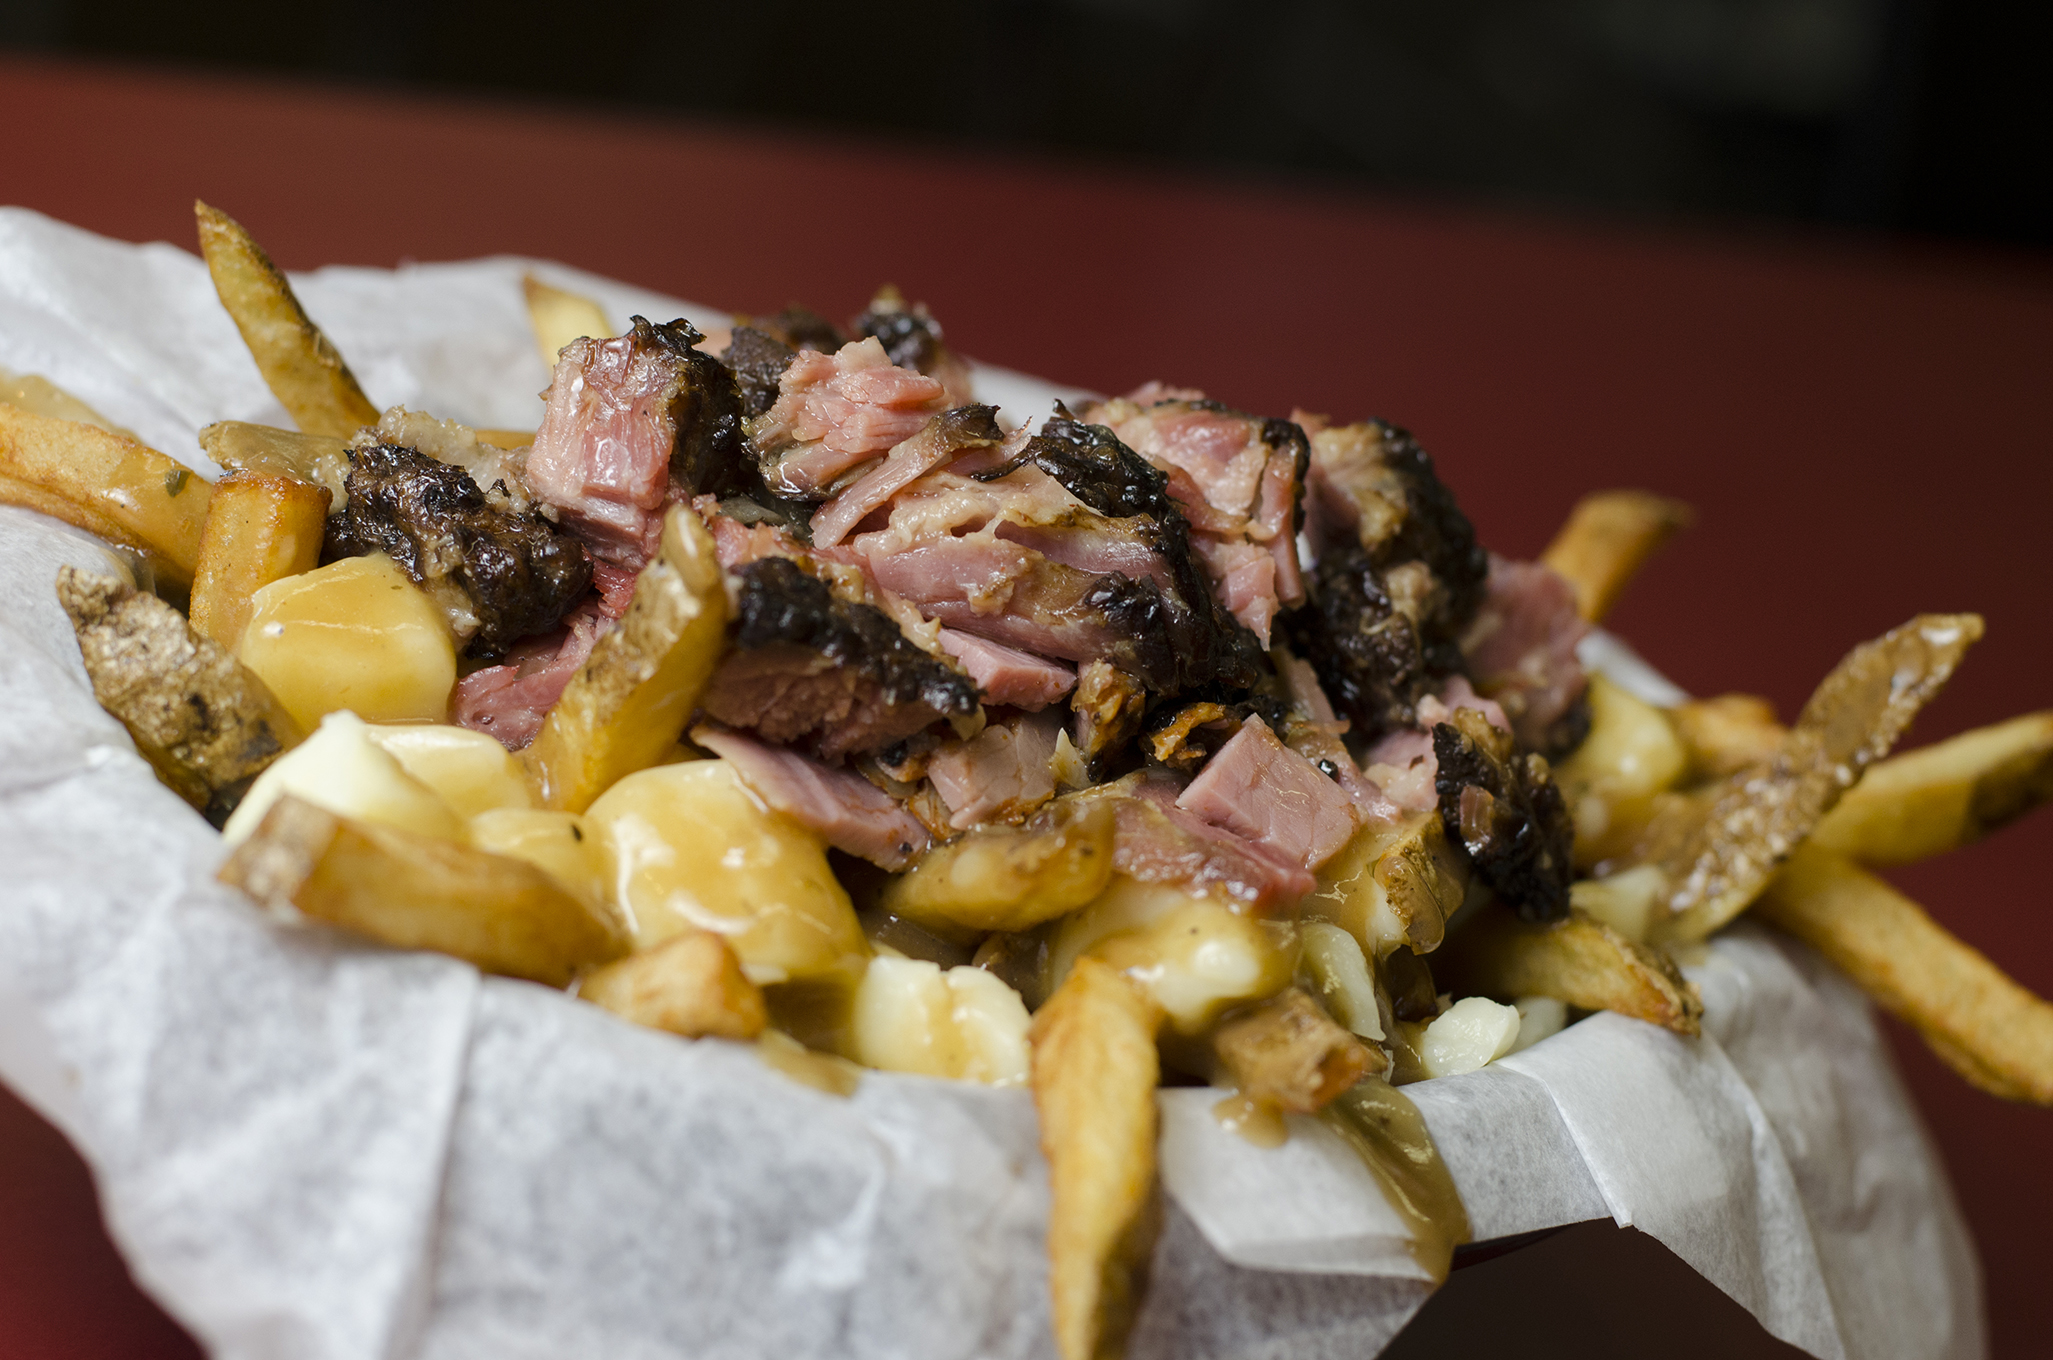 A Montreal smoked meat poutine at Malic's Deli in Windsor, Ontario.